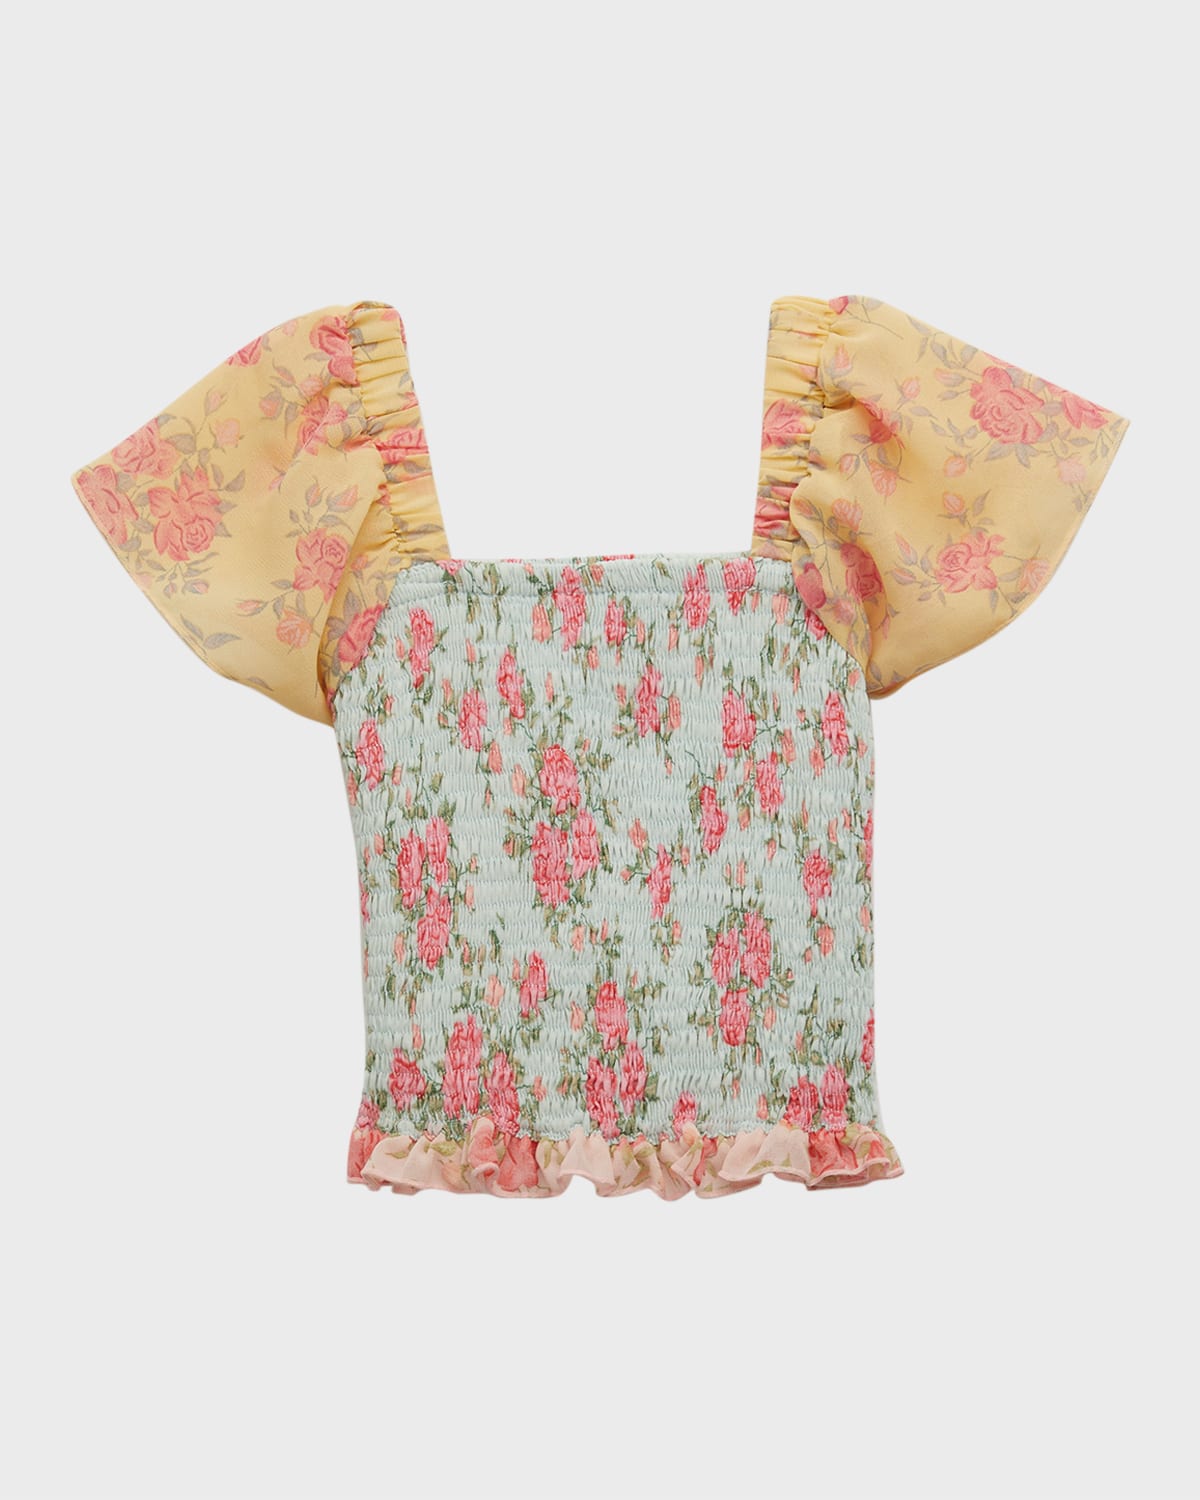 Girl's Smocked Mixed Floral-Prints Top, Size S-XL